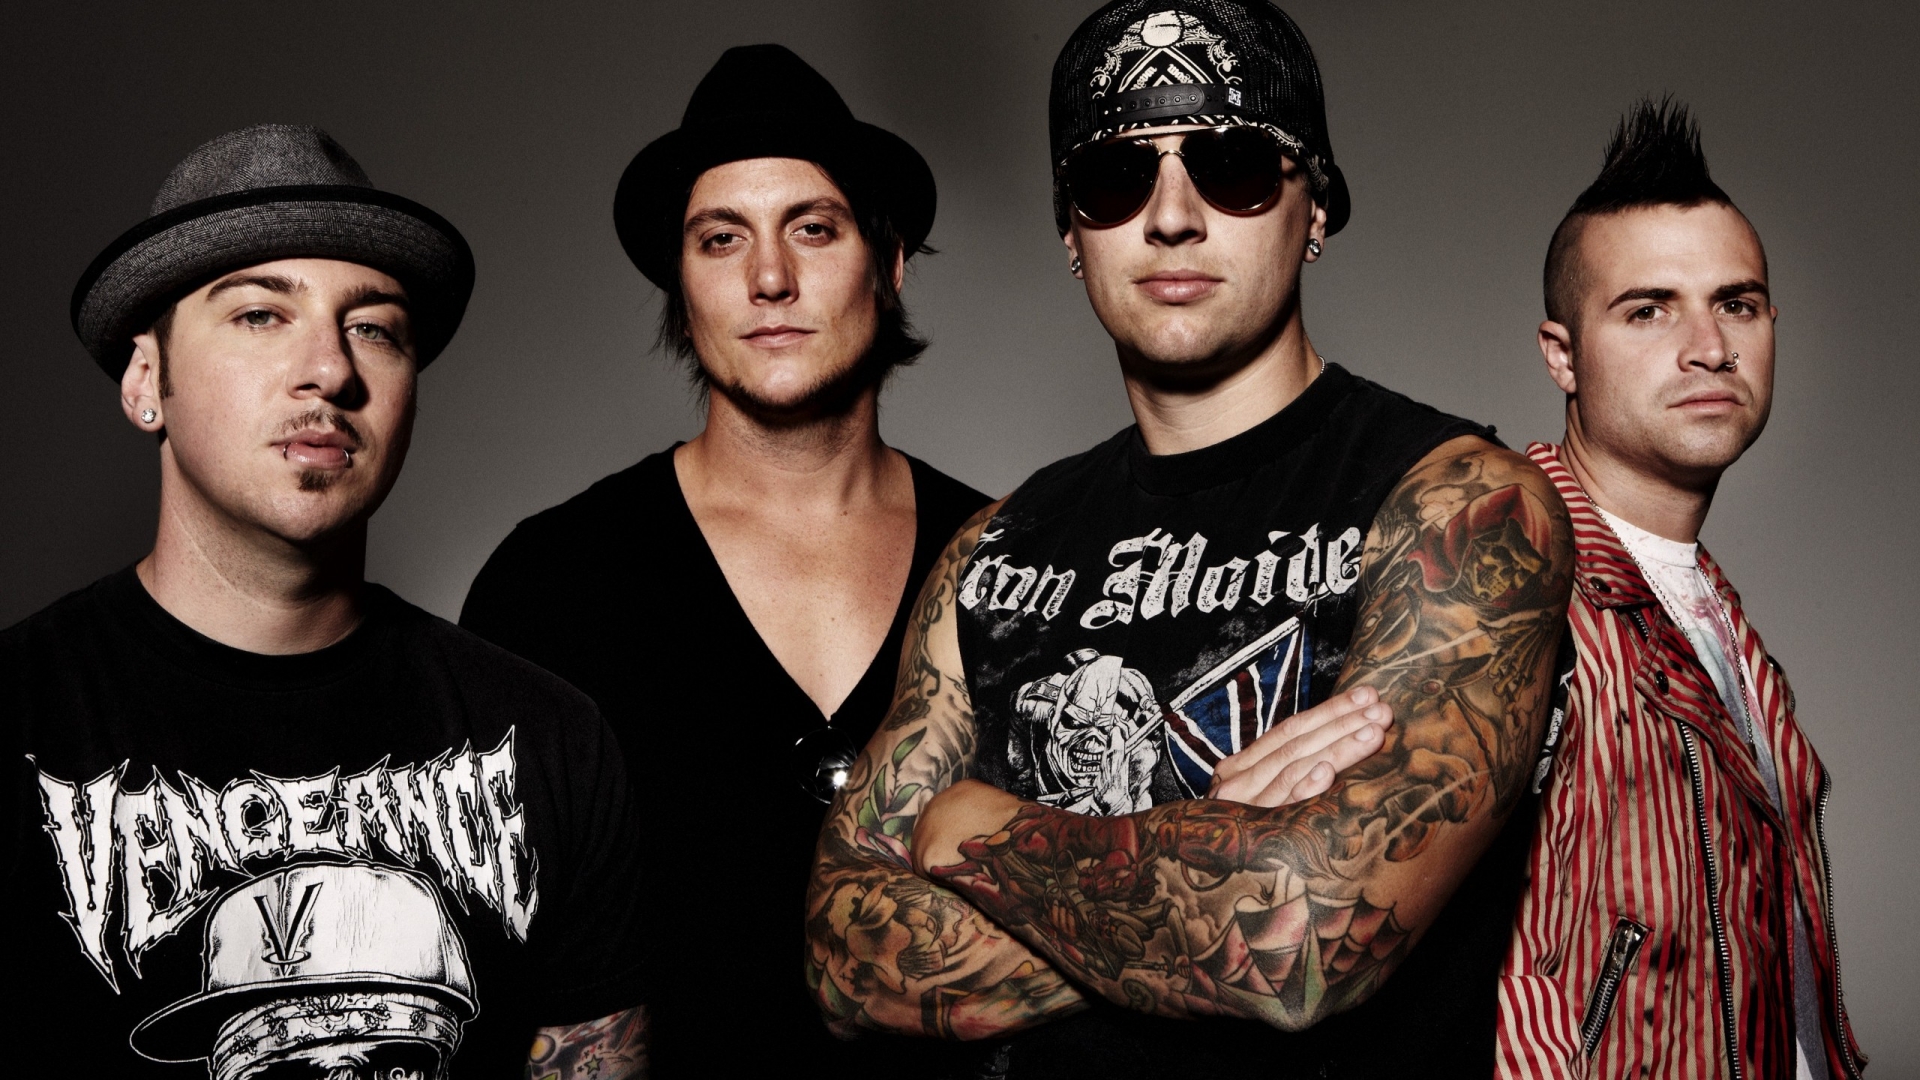 Avenged Sevenfold A7X for 1920 x 1080 HDTV 1080p resolution